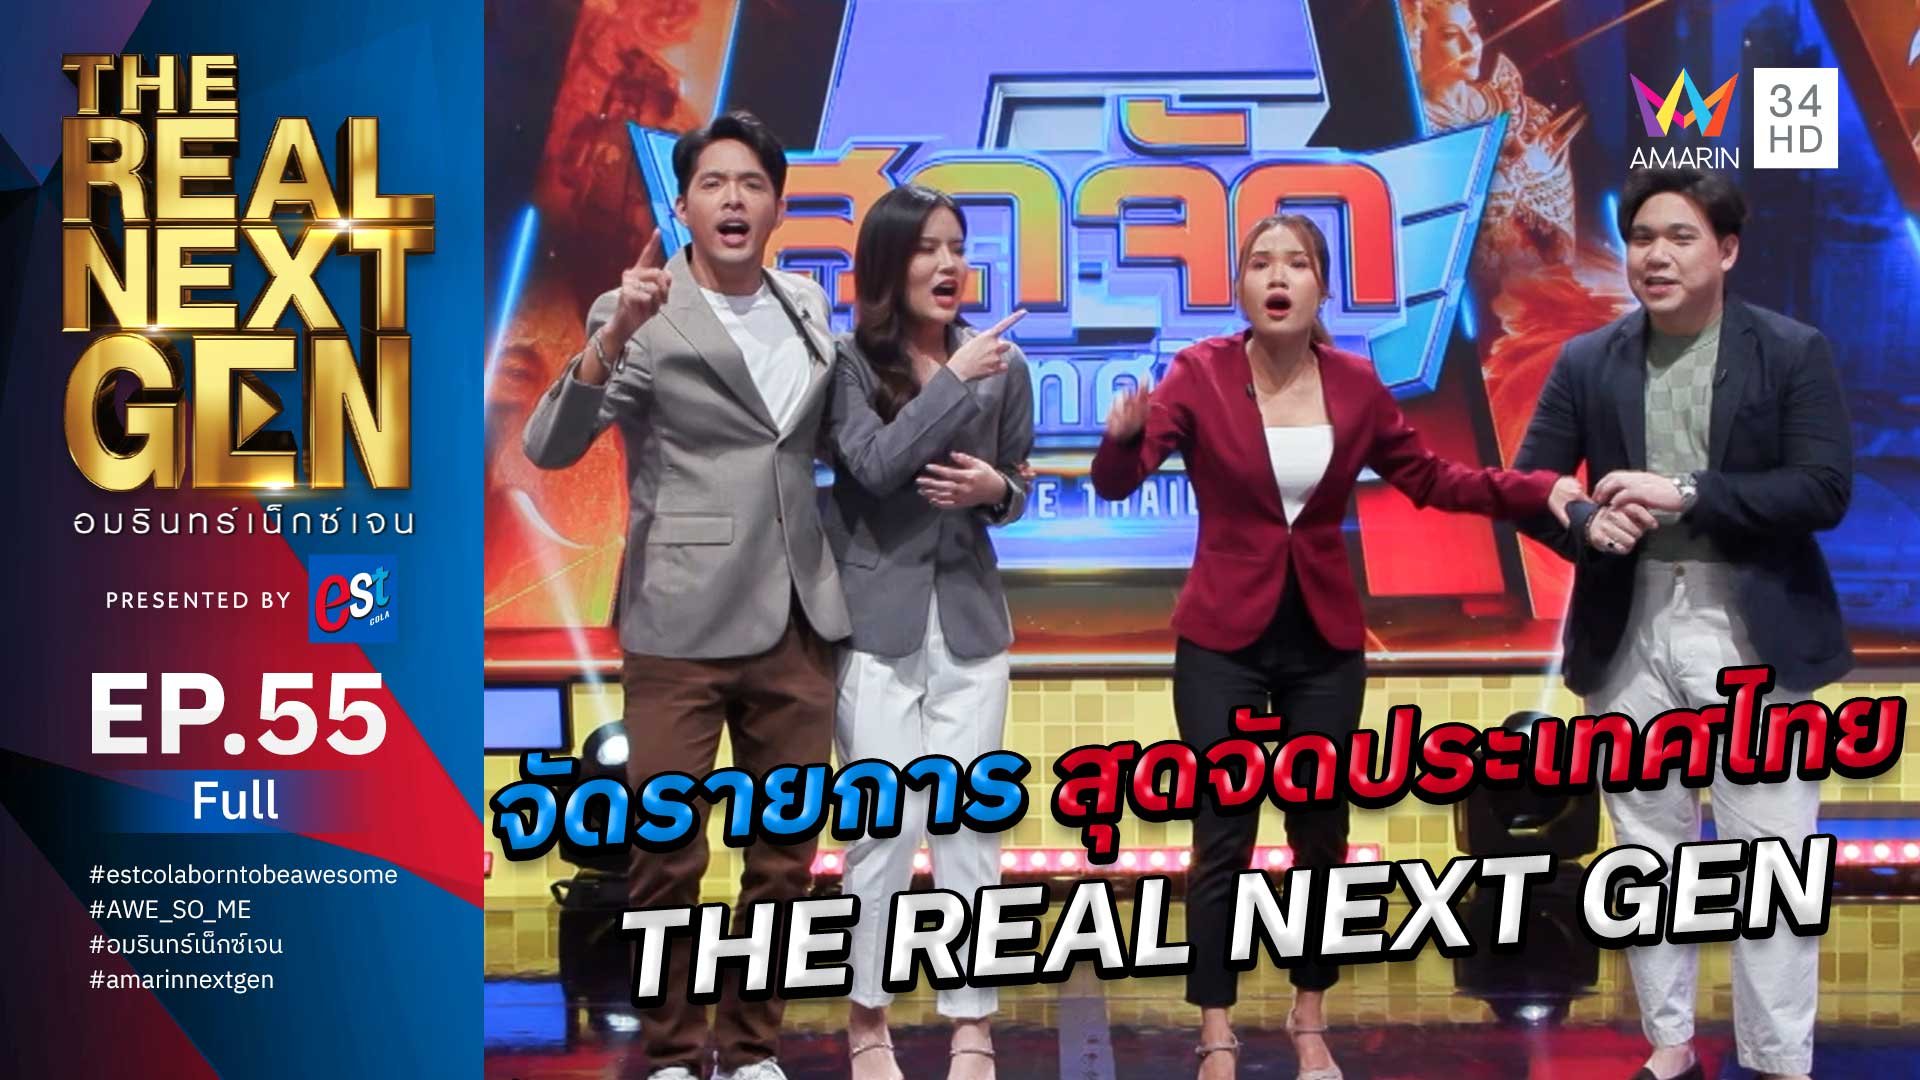 The Real Next Gen อมรินทร์เน็กซ์เจน | EP.55 THE REAL NEXT GEN อมรินทร์เน็กซ์เจน Presented By est cola  | 1 ธ.ค. 66 | AMARIN TVHD34